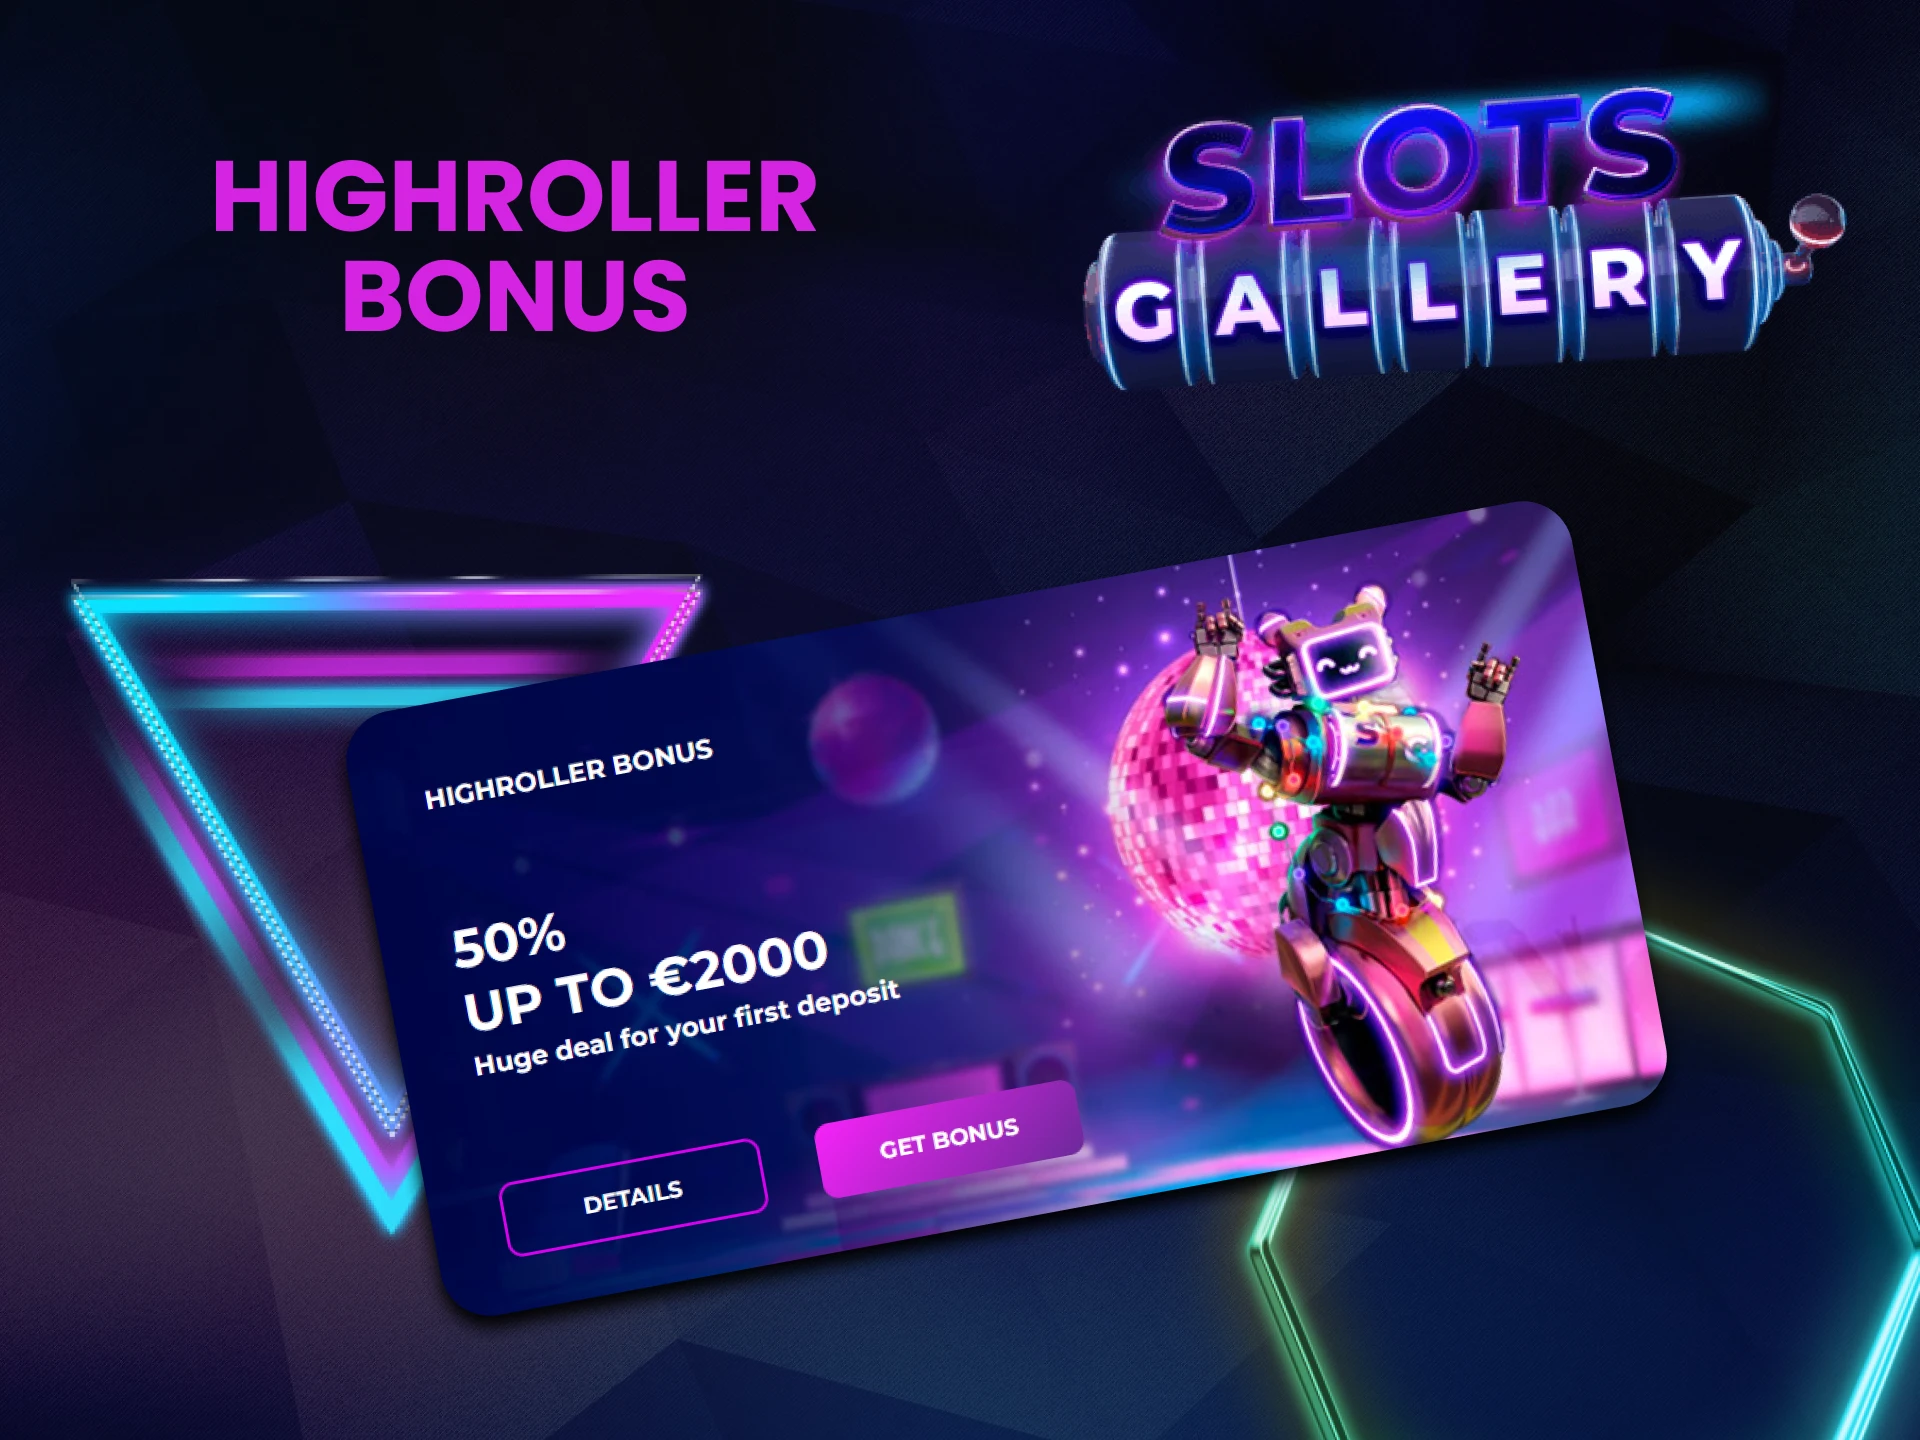 Get a special bonus from Slots Gallery.